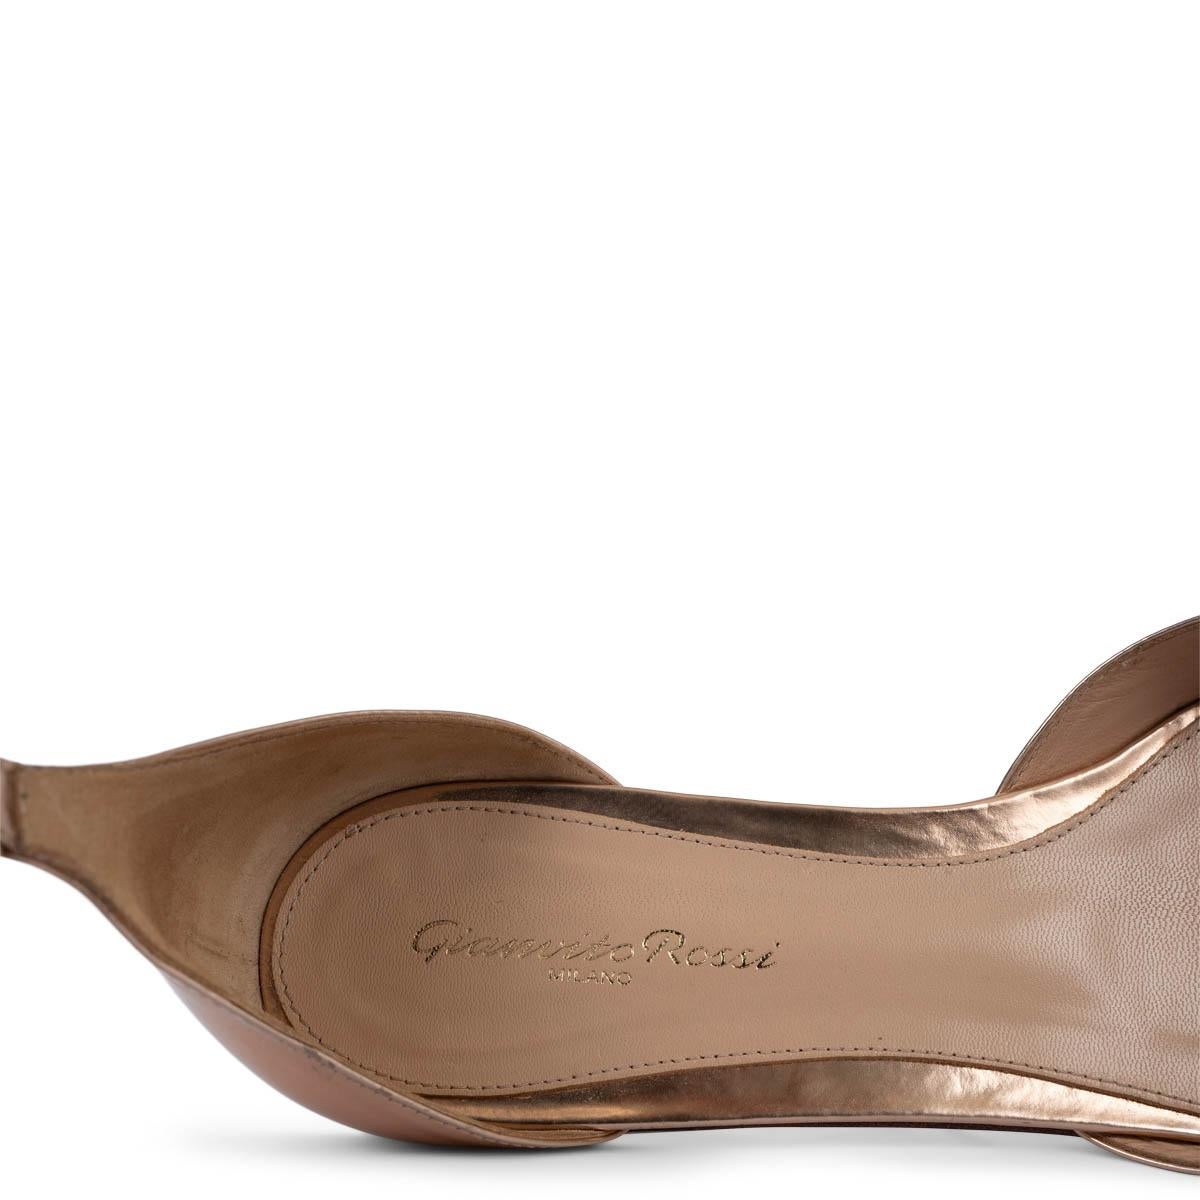 GIANVITO ROSSI rose gold leather GIA Ankle Strap Flats Shoes 39.5 For Sale 2